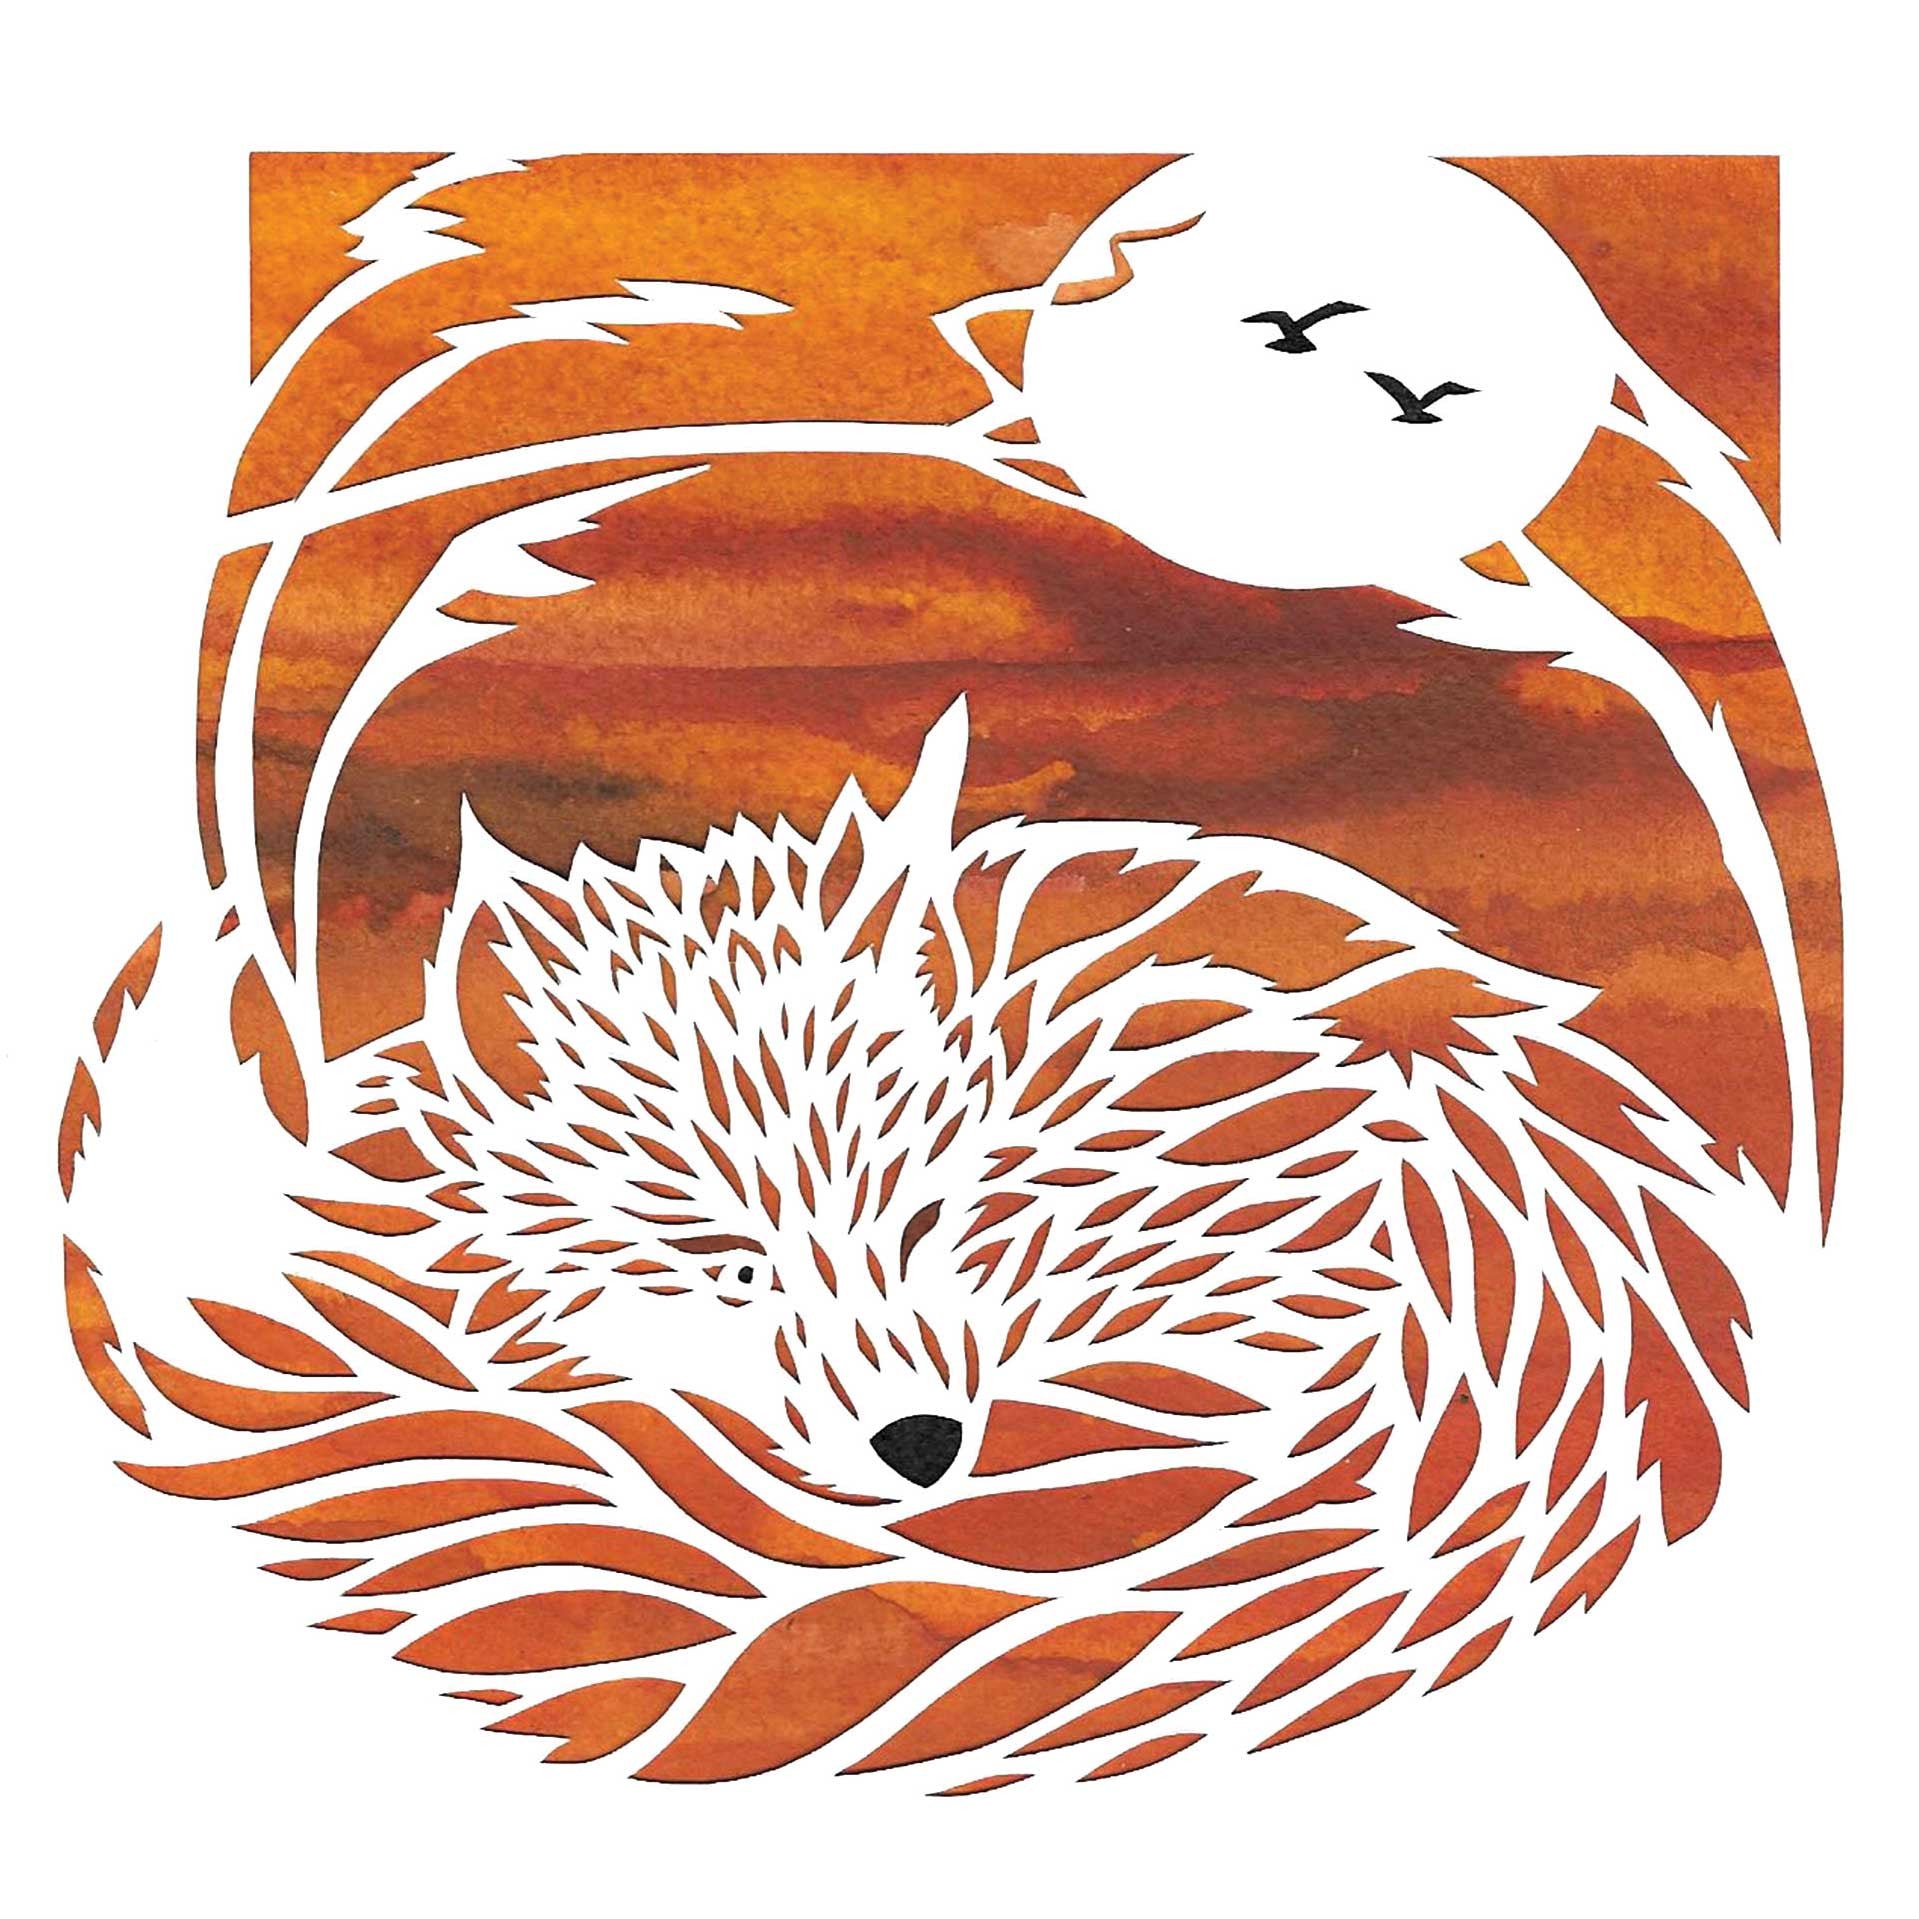 Fox Sunset by Suzanne Breakwell, Art Greeting Card, Papercutting and Ink, Fox sleeping with one eye open